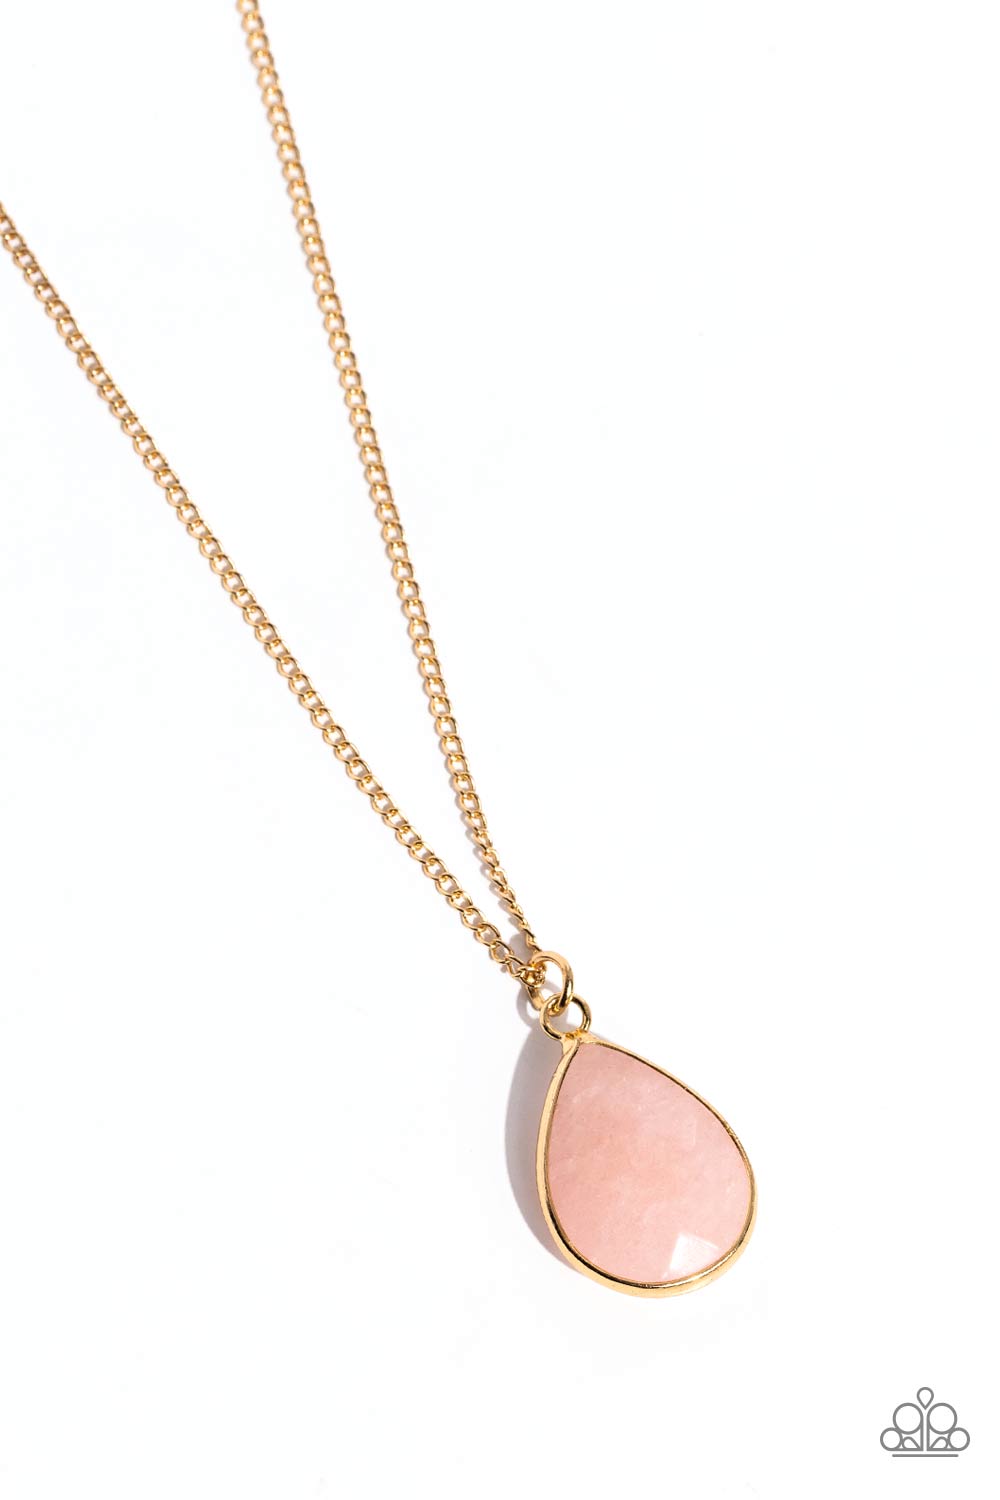 five-dollar-jewelry-sparkling-stones-pink-necklace-paparazzi-accessories